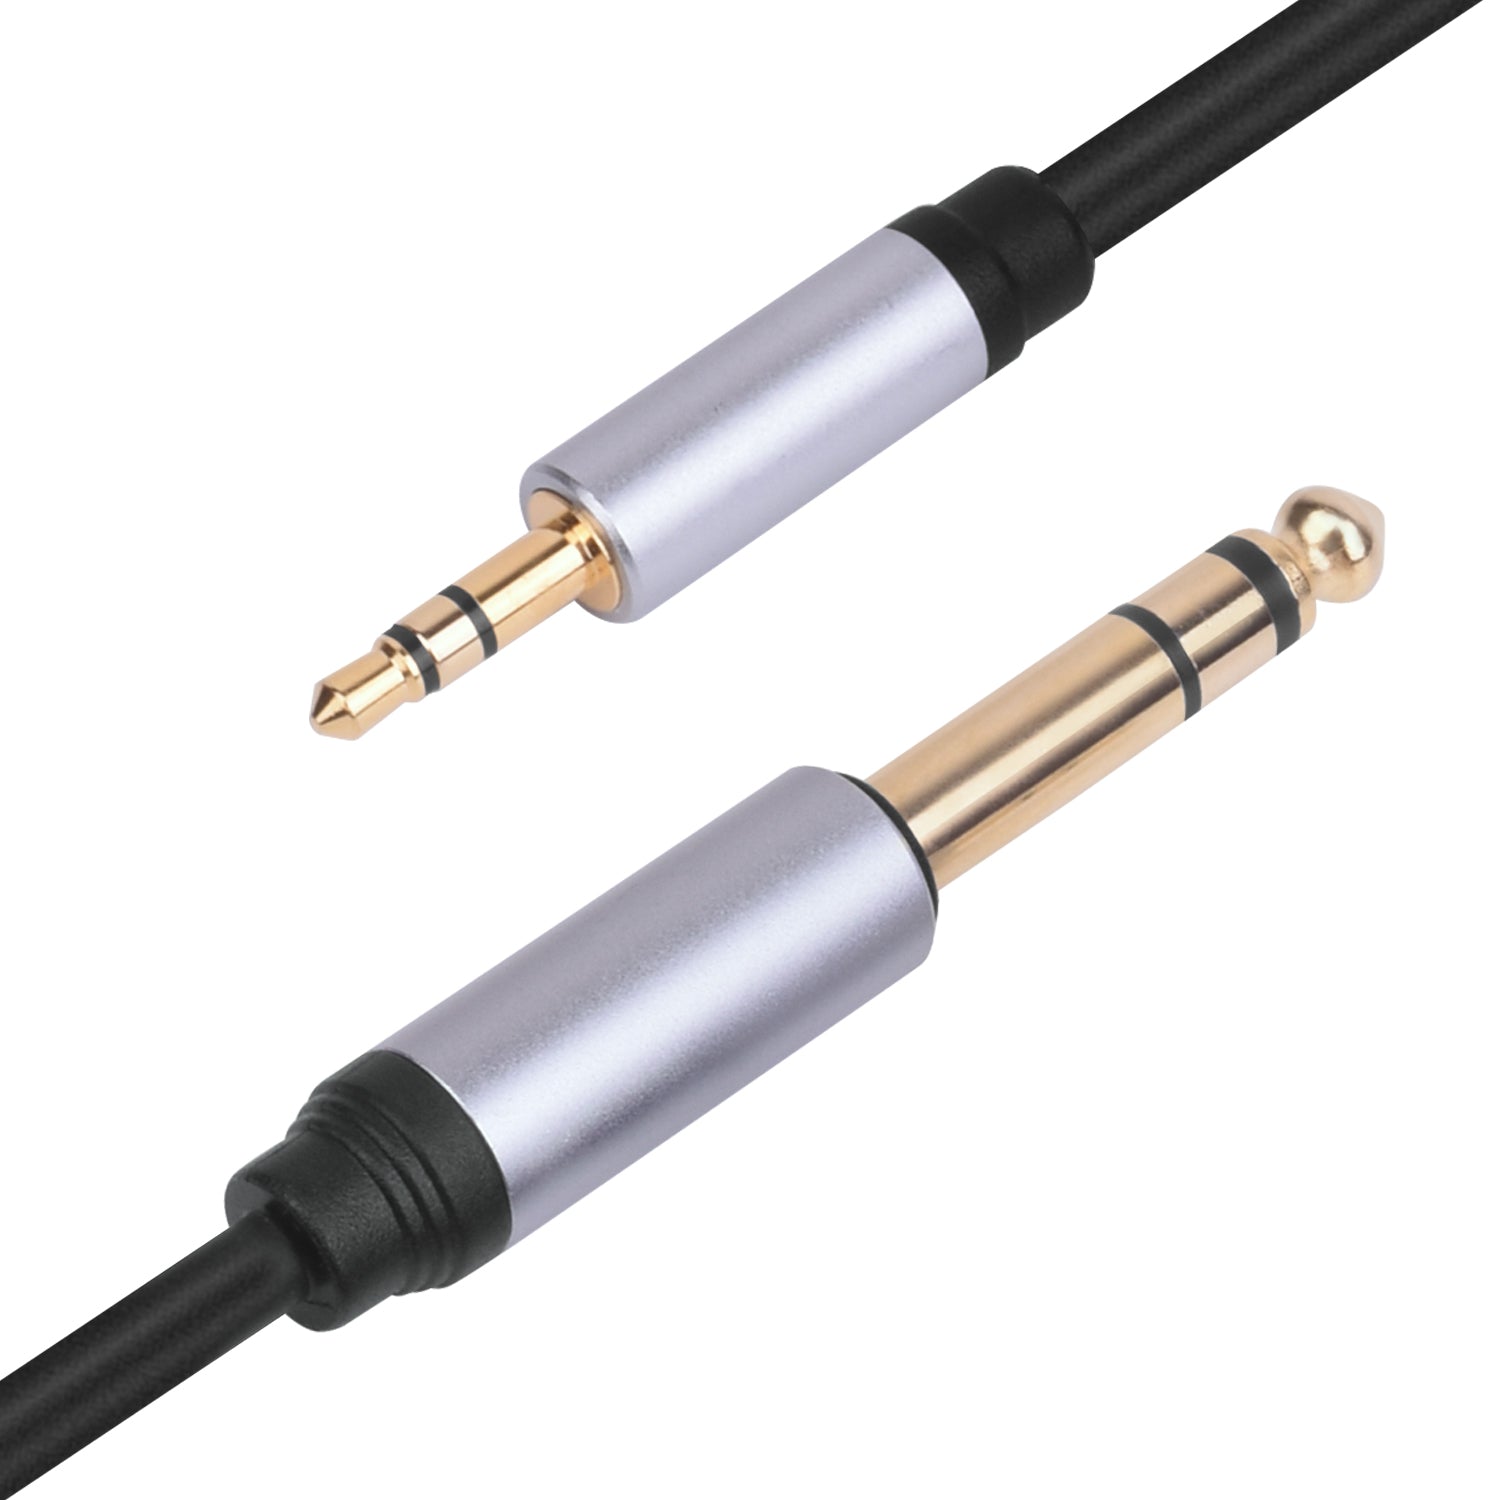 3.5mm to 6.35mm TRS Stereo Audio Cable 1.8m